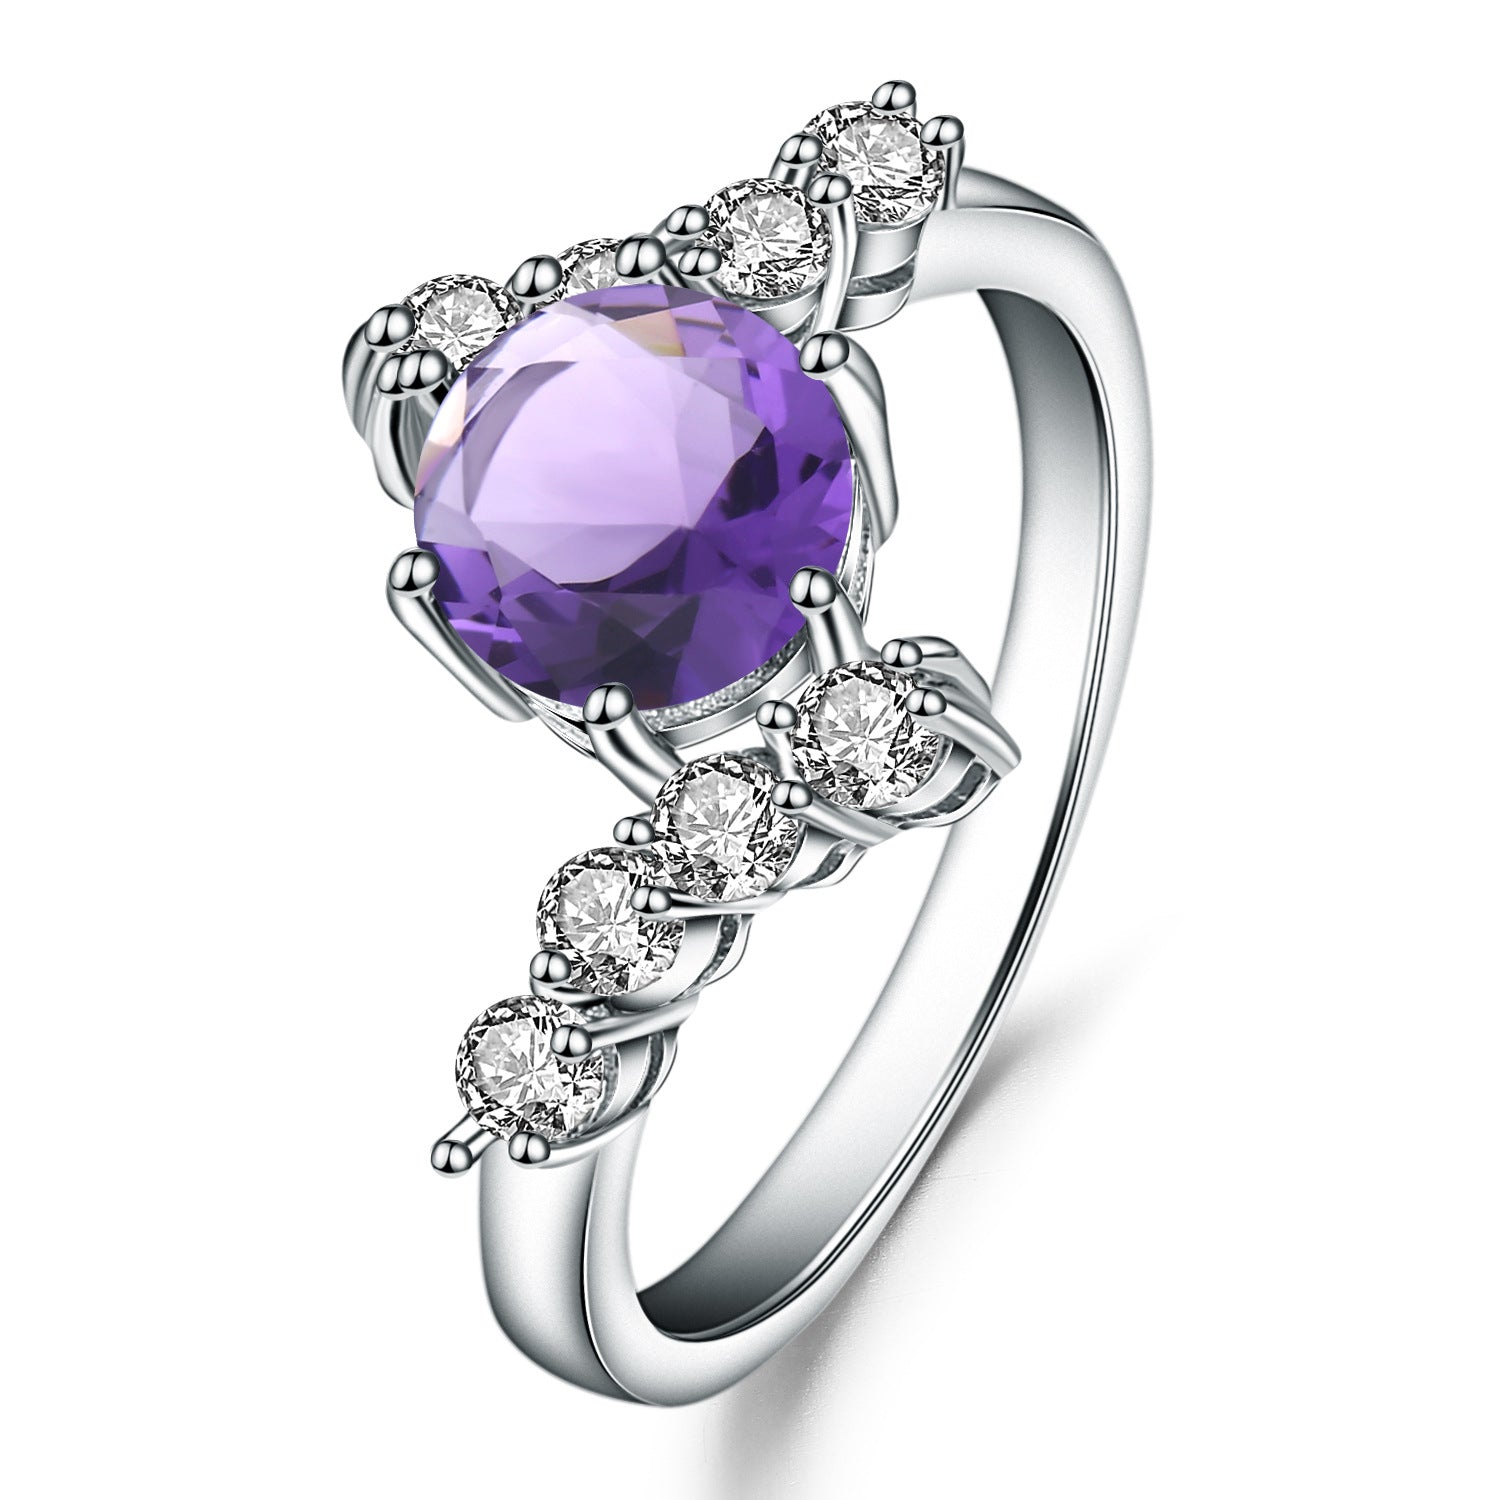 Amethyst Stone Ring - HERS